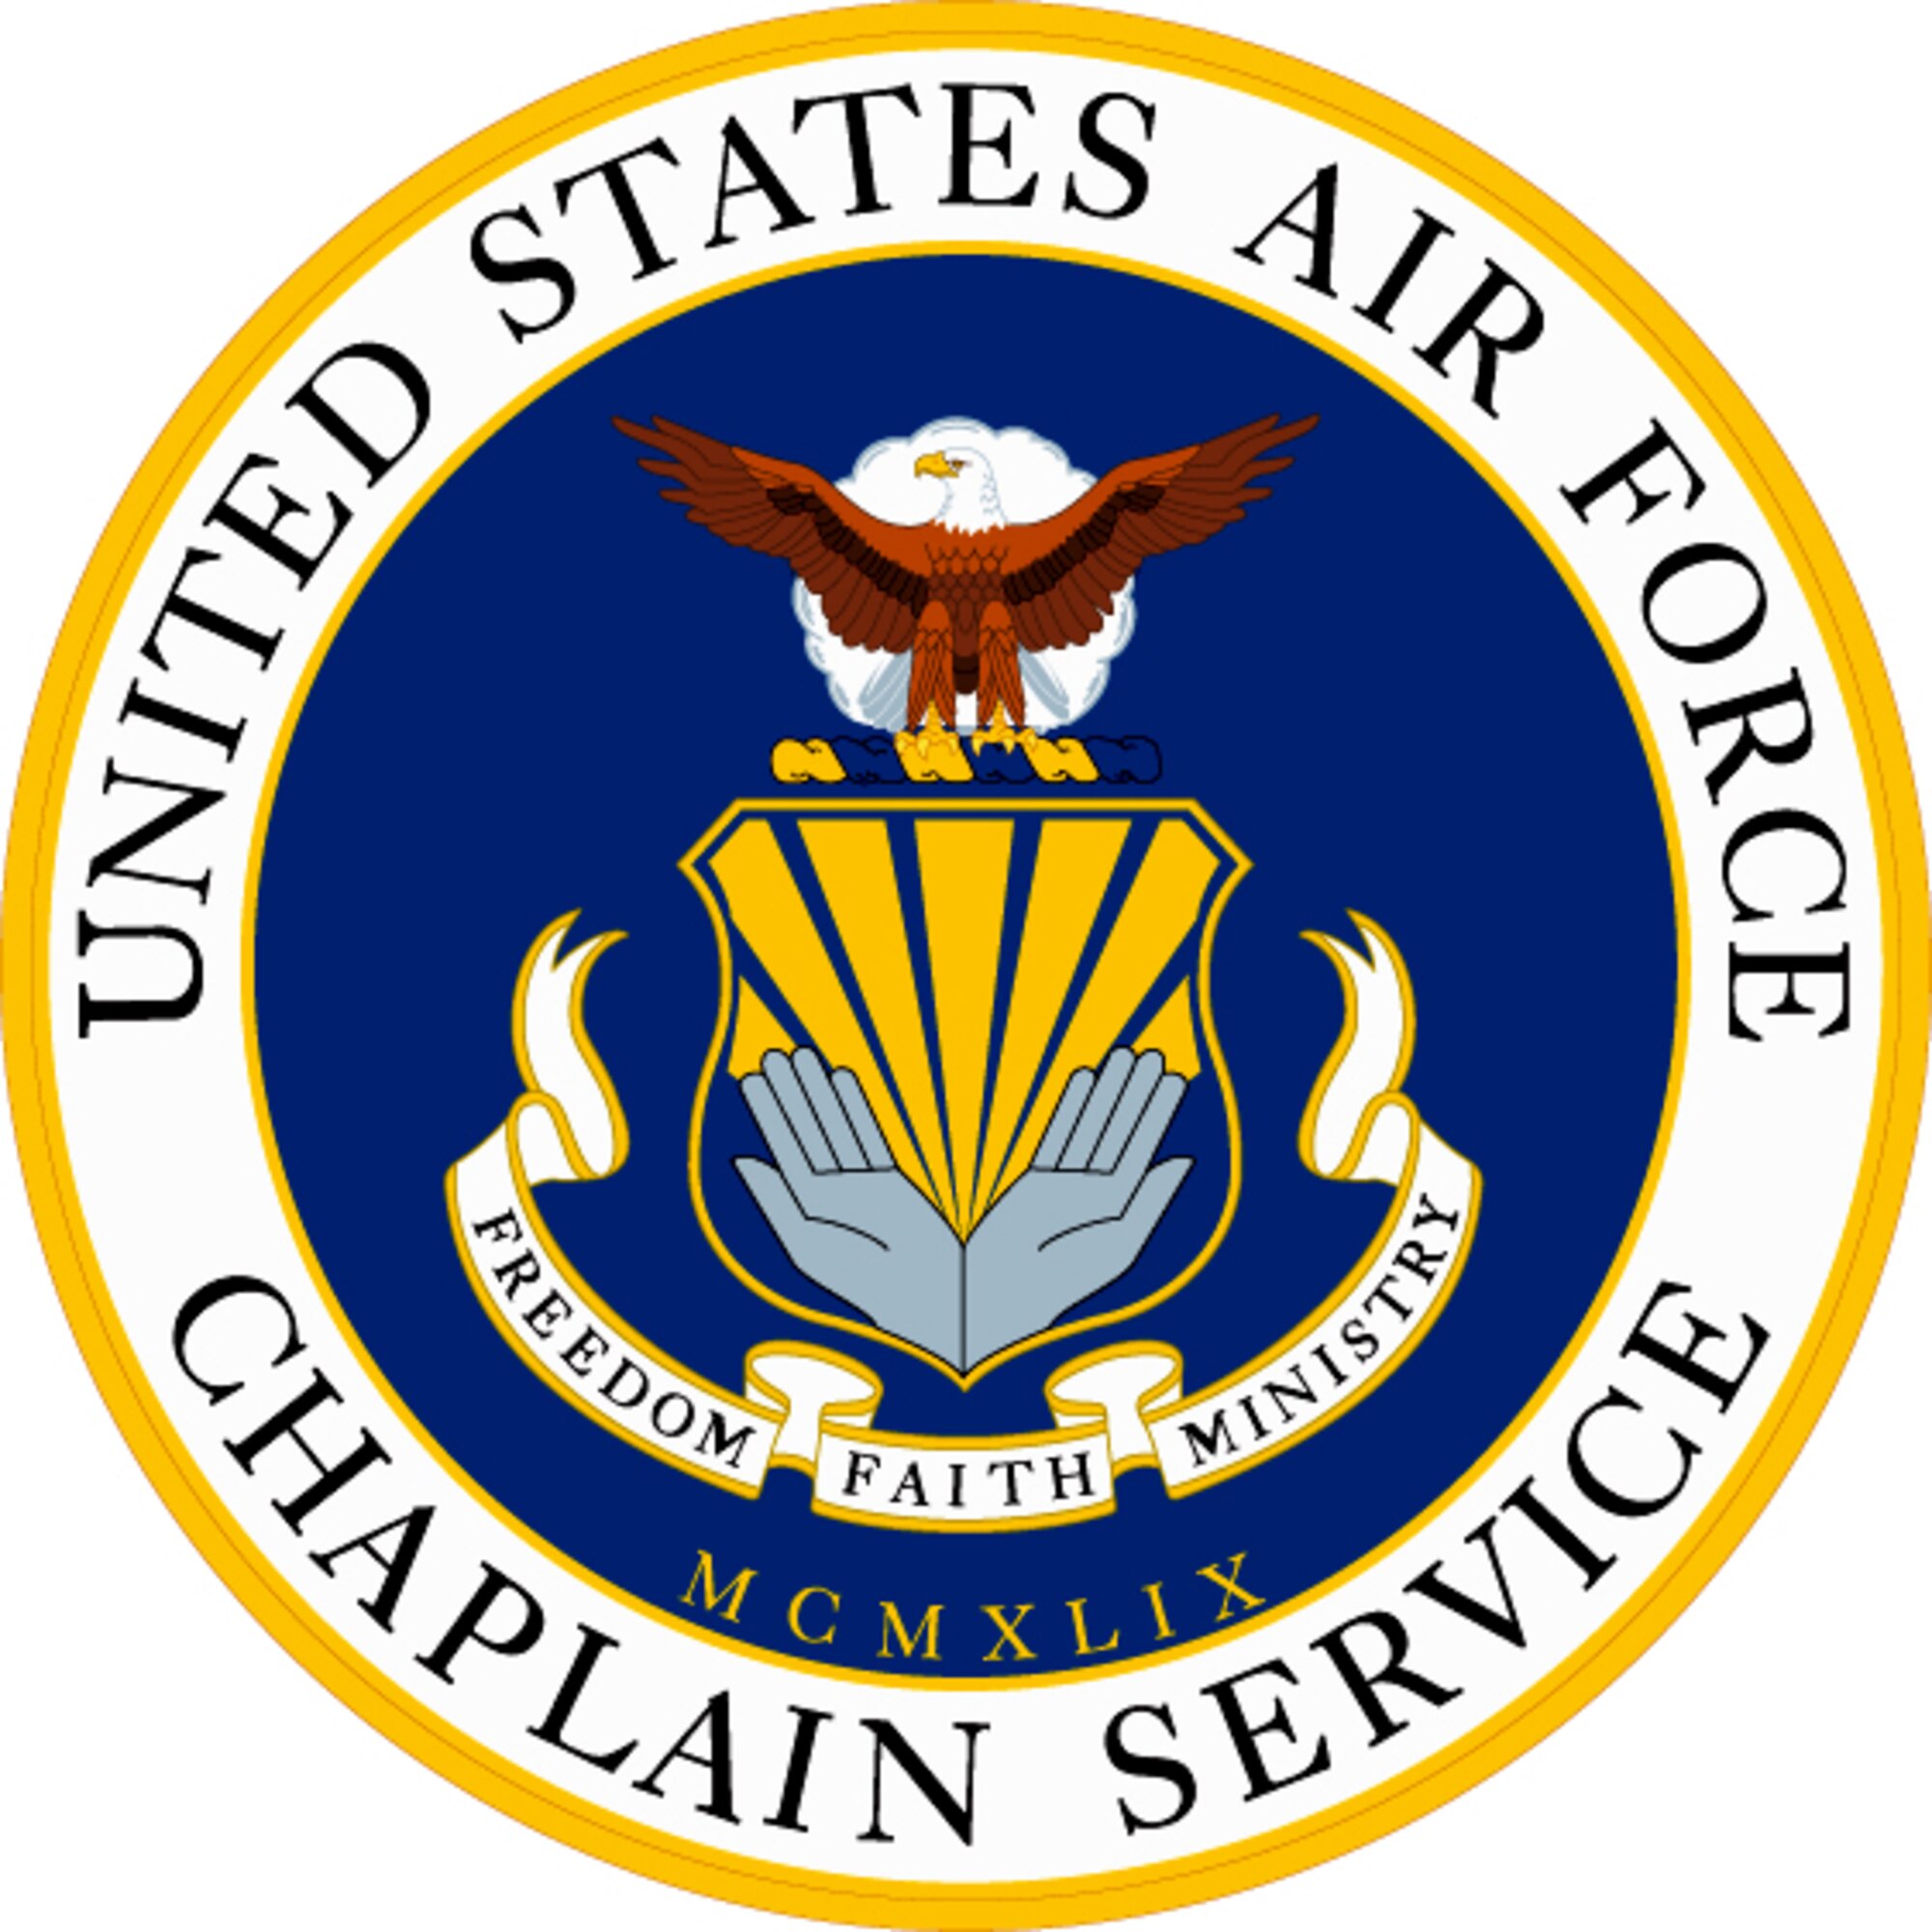 United States Air Force Chaplain Service logo